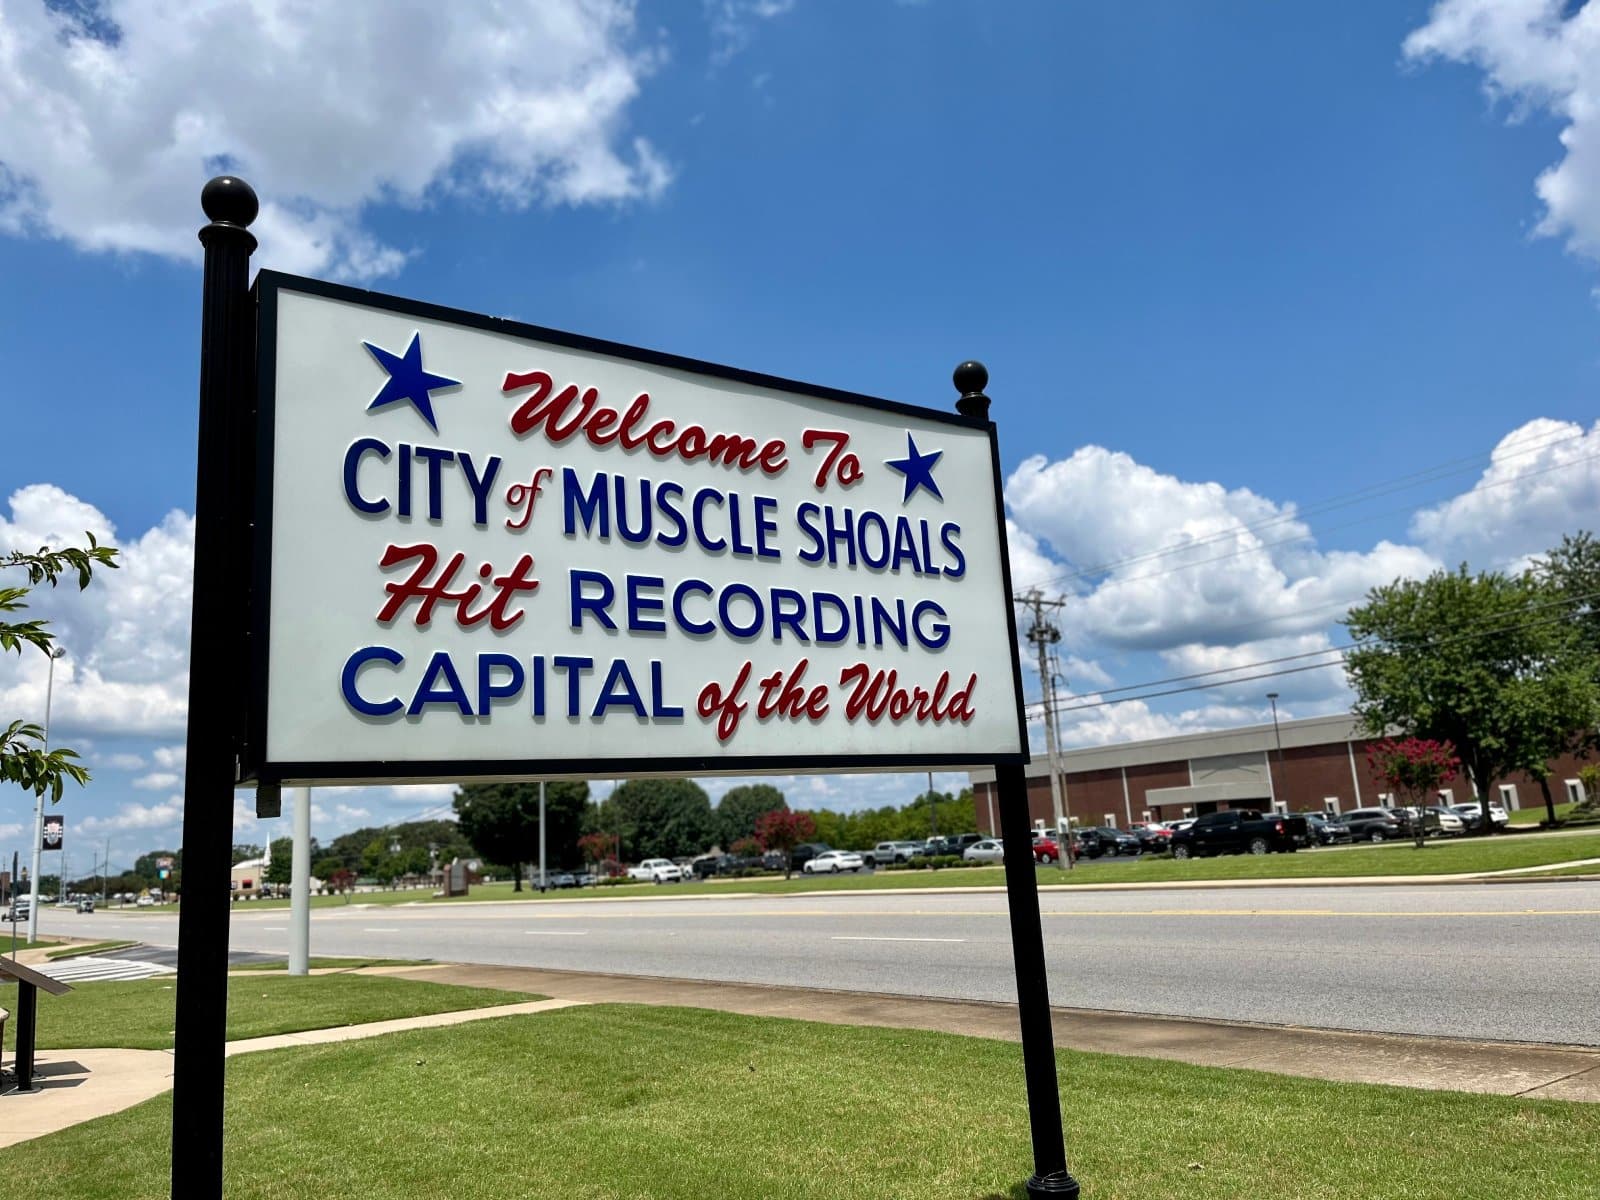 <p class="wp-caption-text">Image Credit: Shutterstock / Luisa P Oswalt</p>  <p><span>Muscle Shoals is famous worldwide for its rich musical history. Artists like Aretha Franklin and the Rolling Stones came to Alabama to catch that Muscle Shoals sound. Bet you didn’t know Alabama got groove!</span></p>